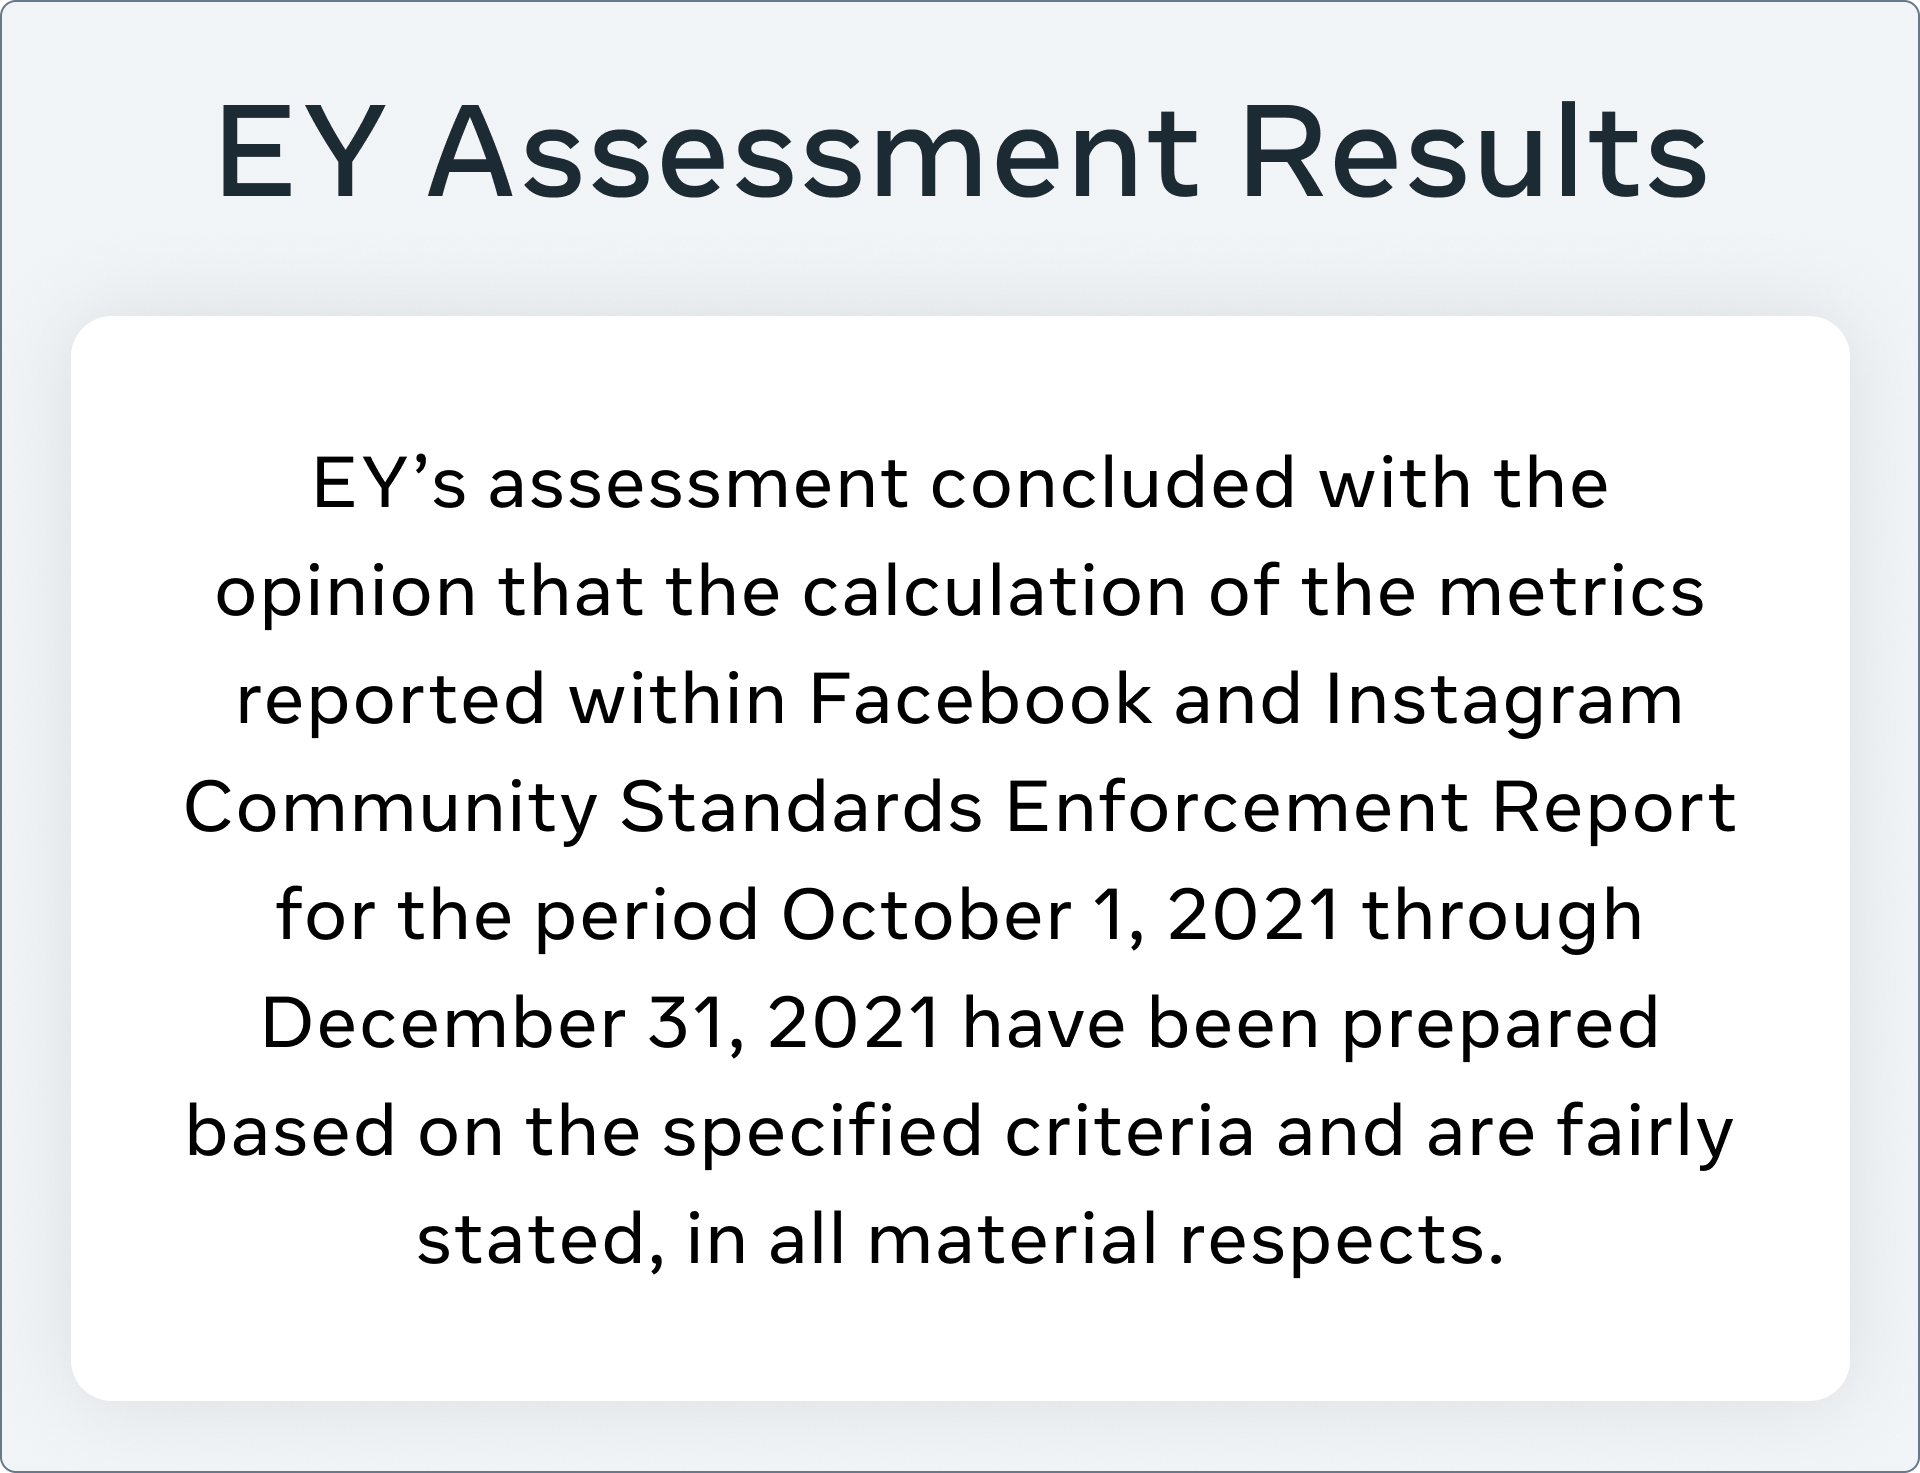 Graphic that reads: EY's assessment concluded with the opinion that the calculation of the metrics reported within Facebook and Instagram Community Standards Enforcement Report for the period October 1, 2021 through December 31, 2021 have been prepared based on the specific criteria and are fairly stated, in all material respects.